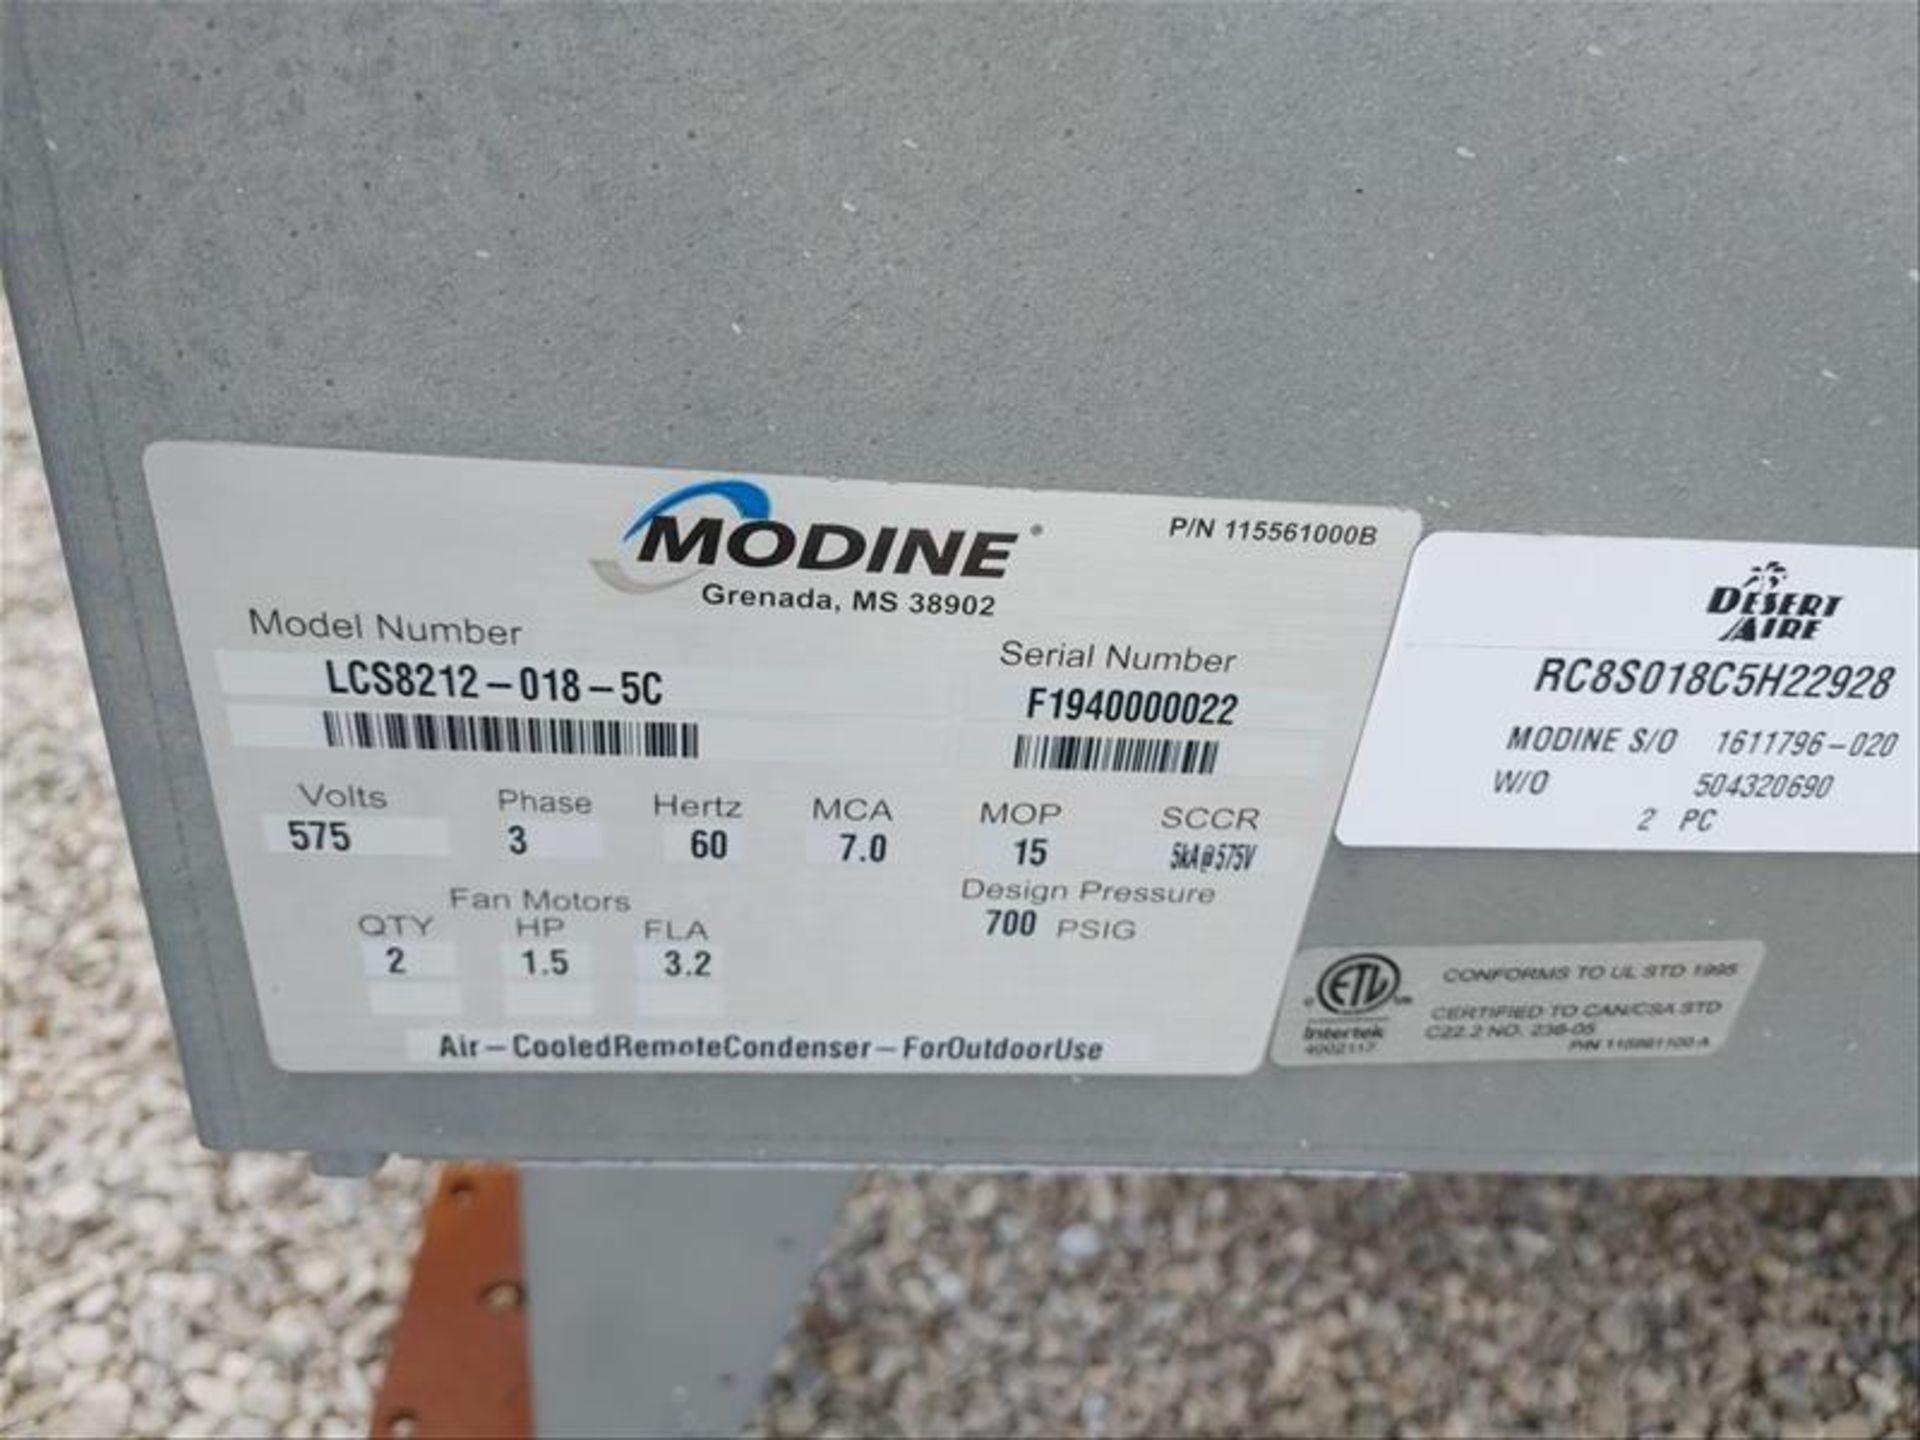 Modine Air Cooled Remote Condenser, model LCS8212-018-5C, S/N F1940000022, 575 volts, 3 phase, 60 - Image 3 of 3